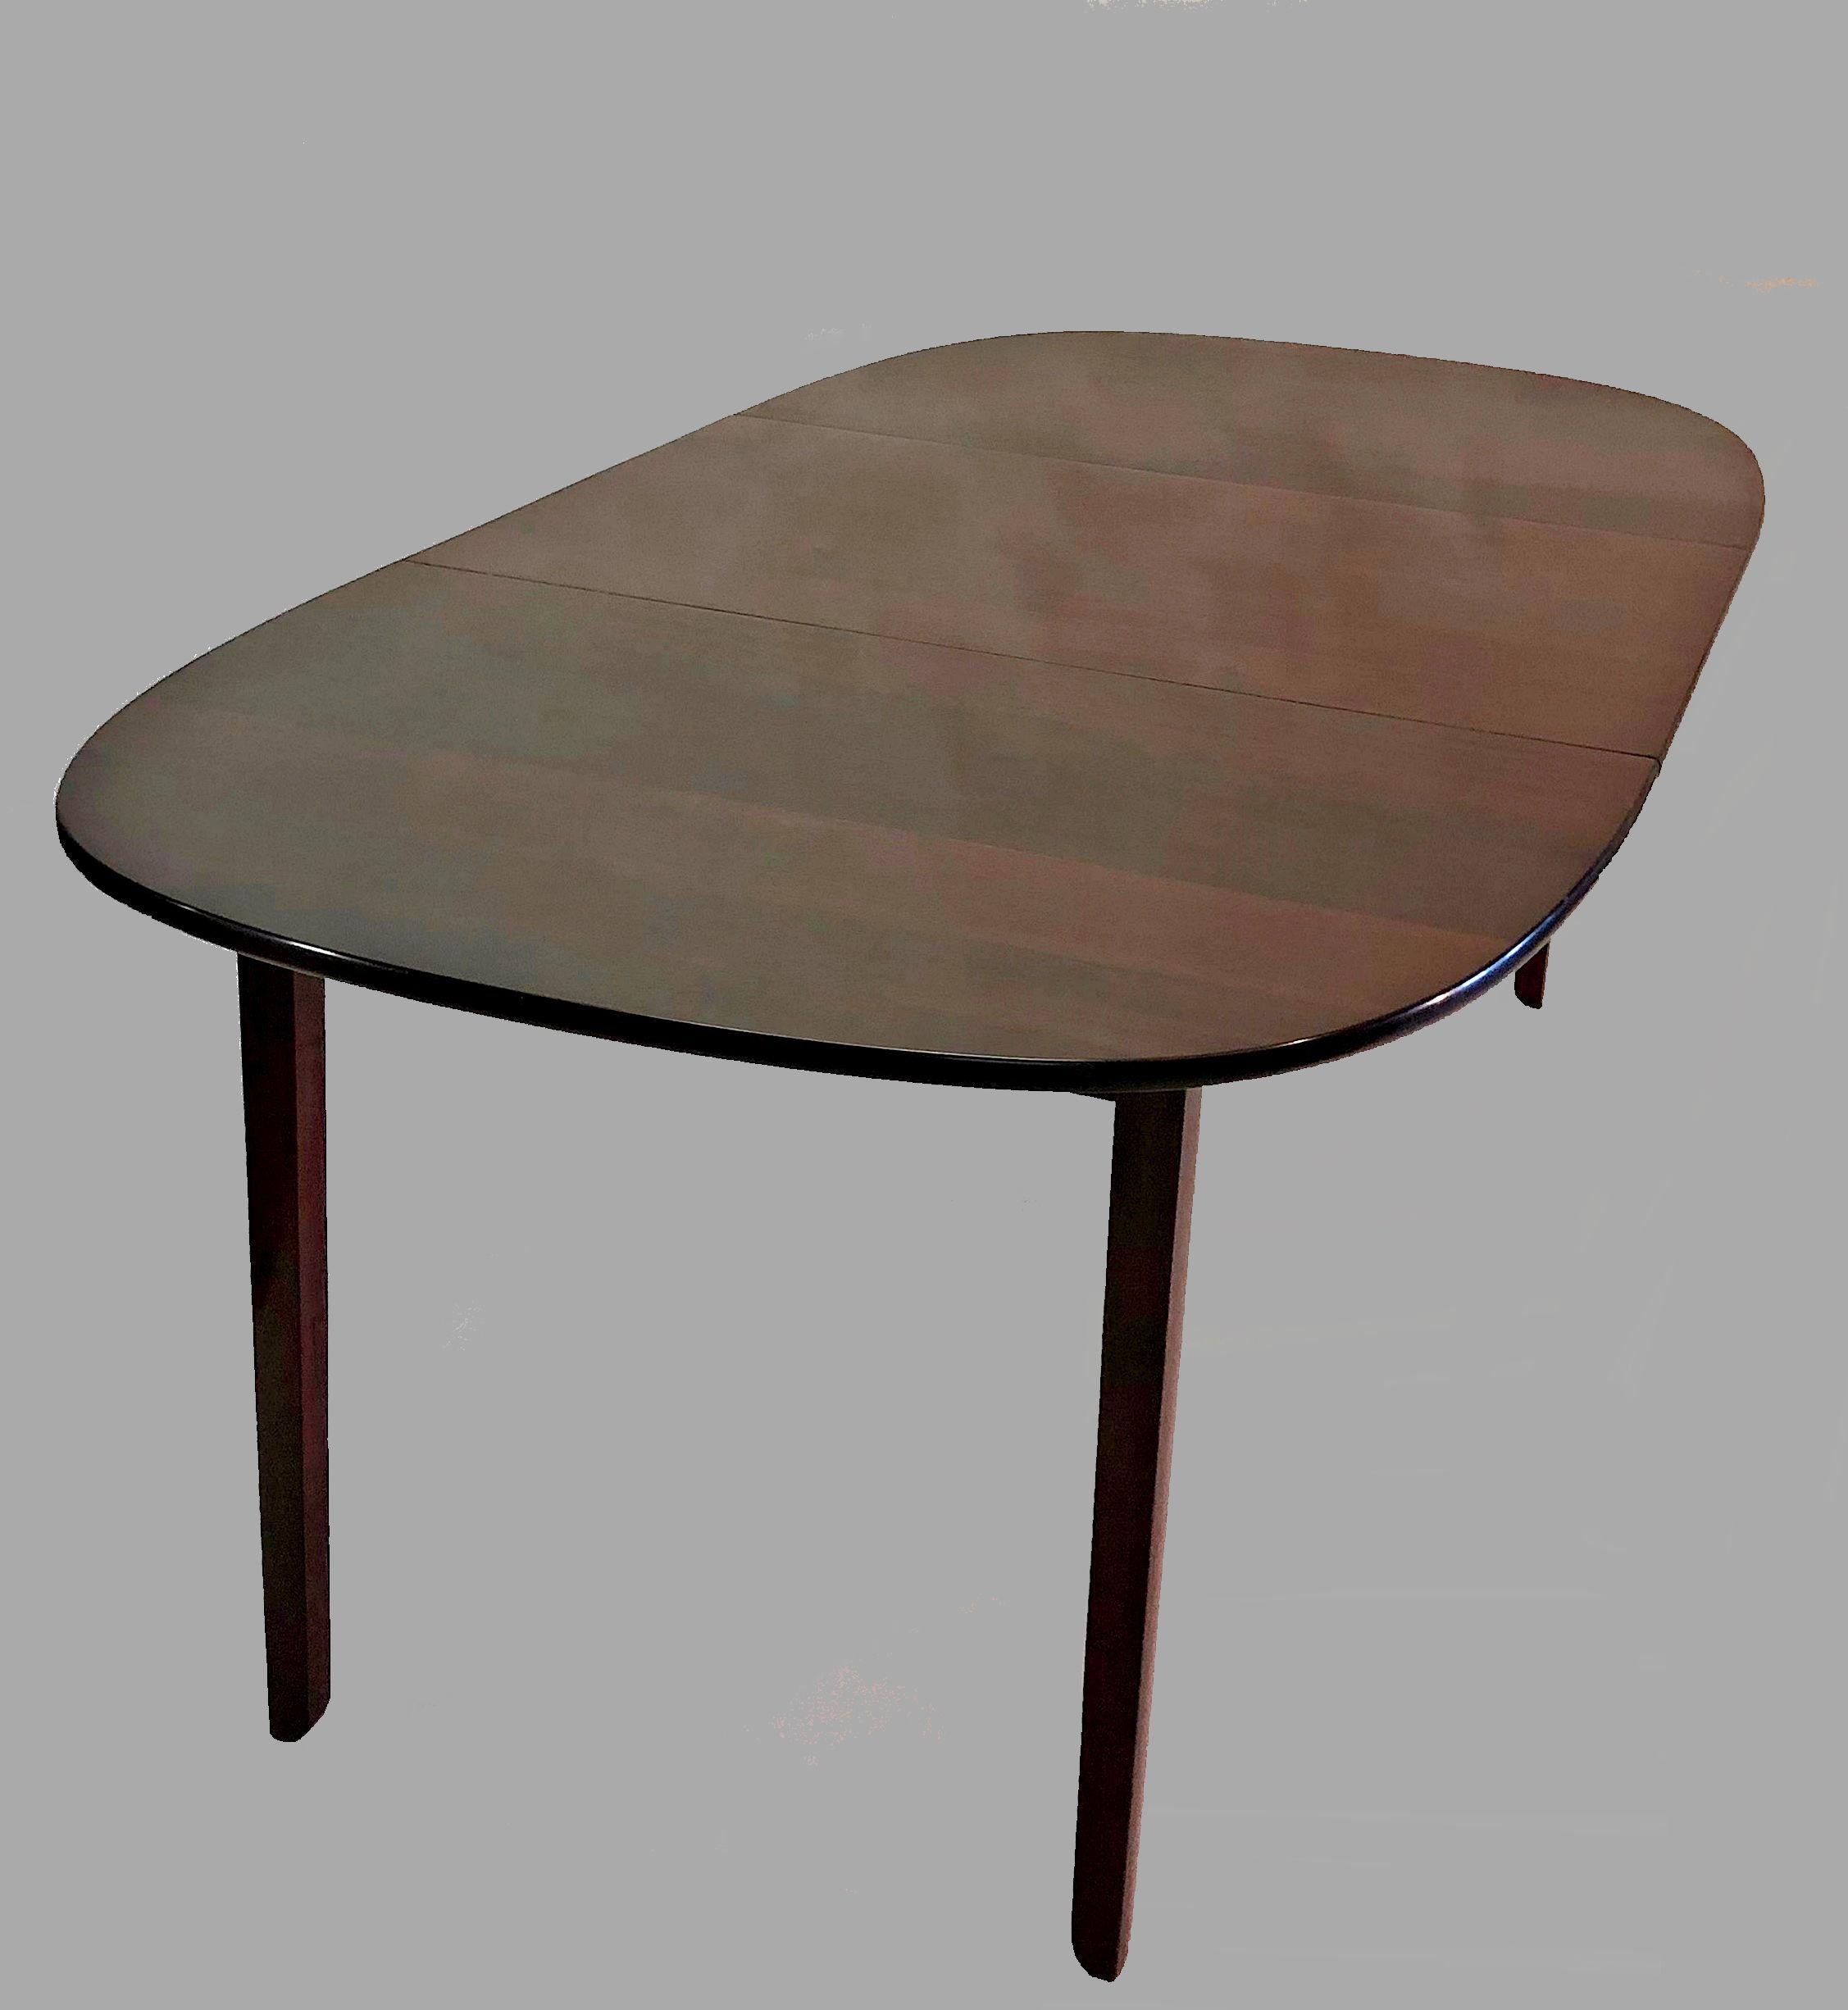 1960s Ole Wanscher Refinished Expandable Mahogany Dining Table by P. Jeppesen In Good Condition For Sale In Knebel, DK